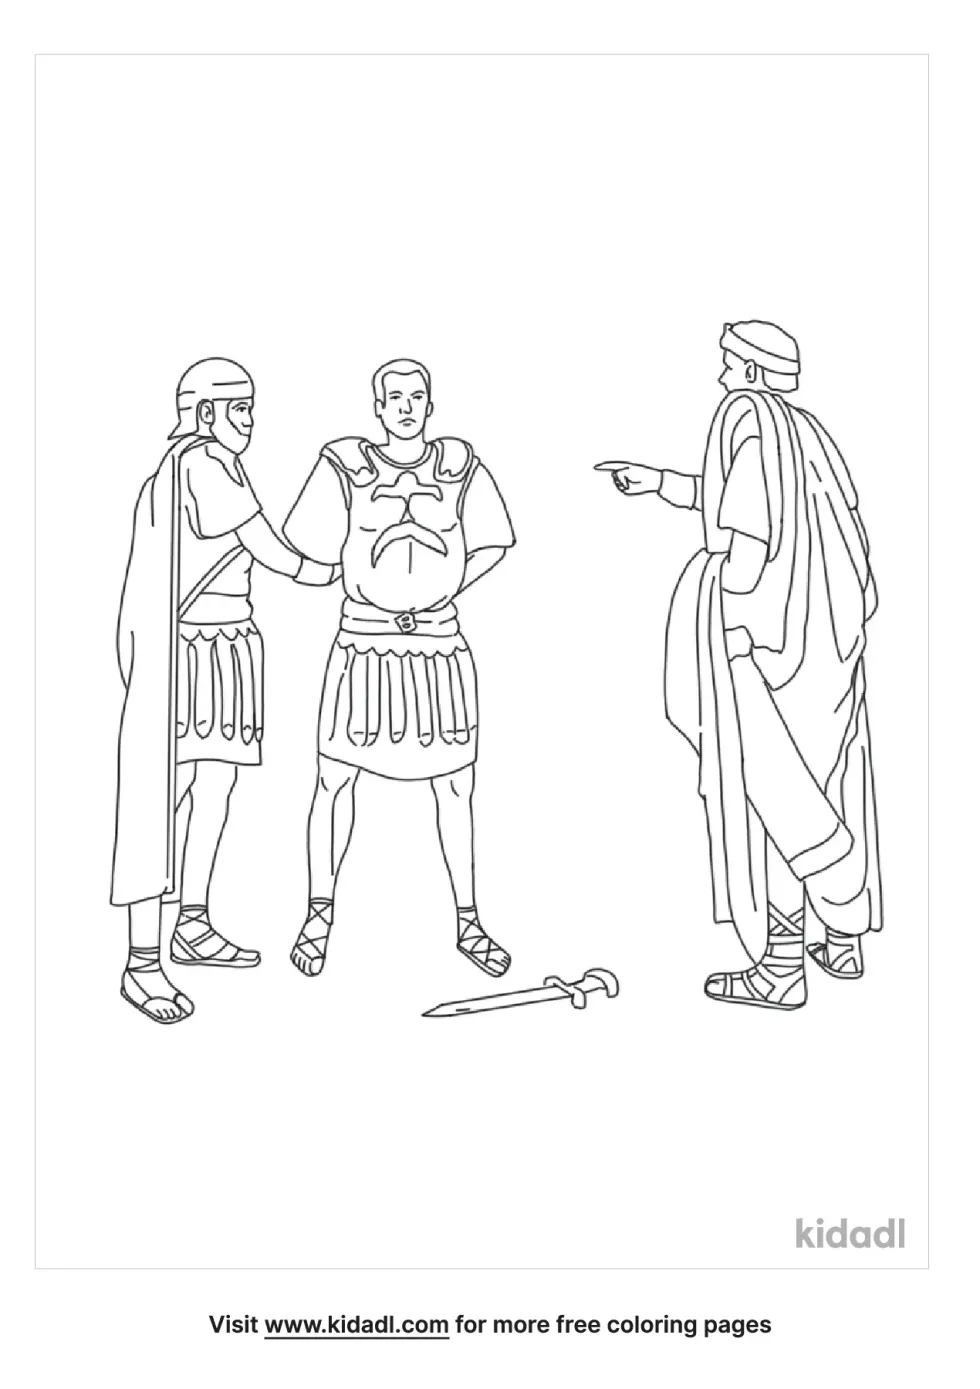 The Theban Legion Coloring Page